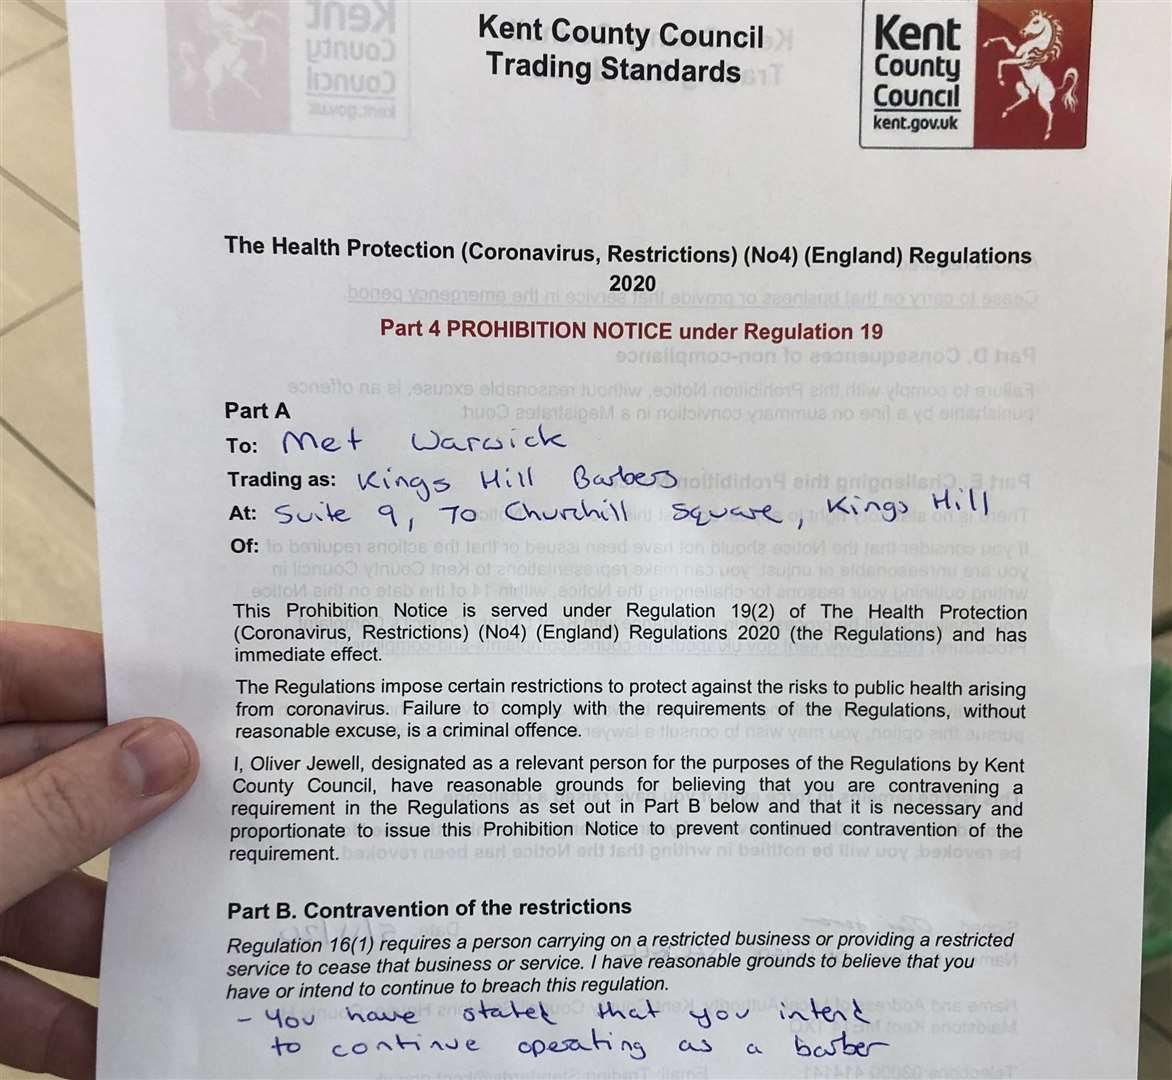 The notice served to Met Warwick by Kent County Council